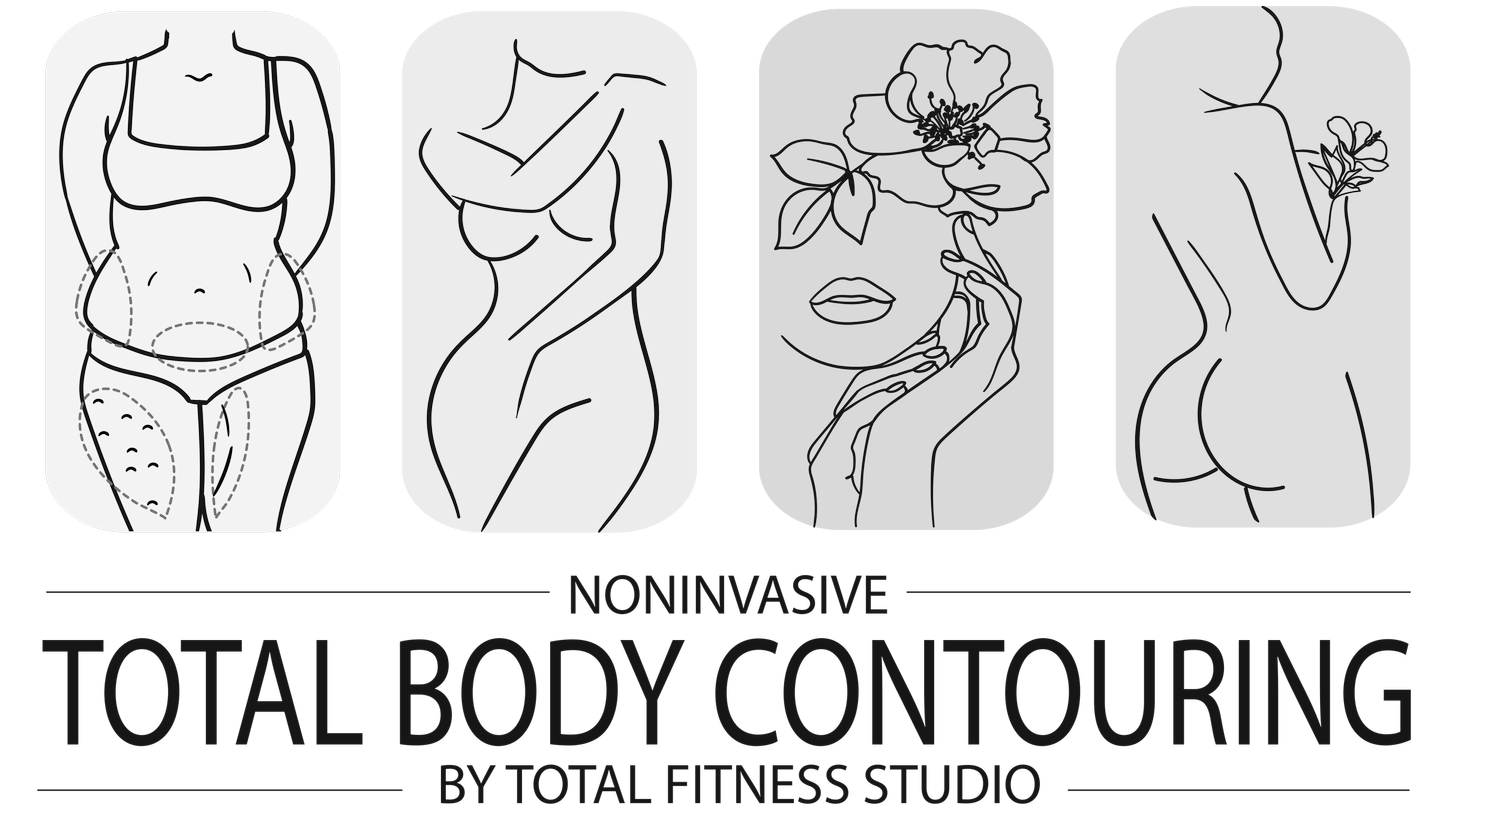 Total Body Contouring by Total Fitness